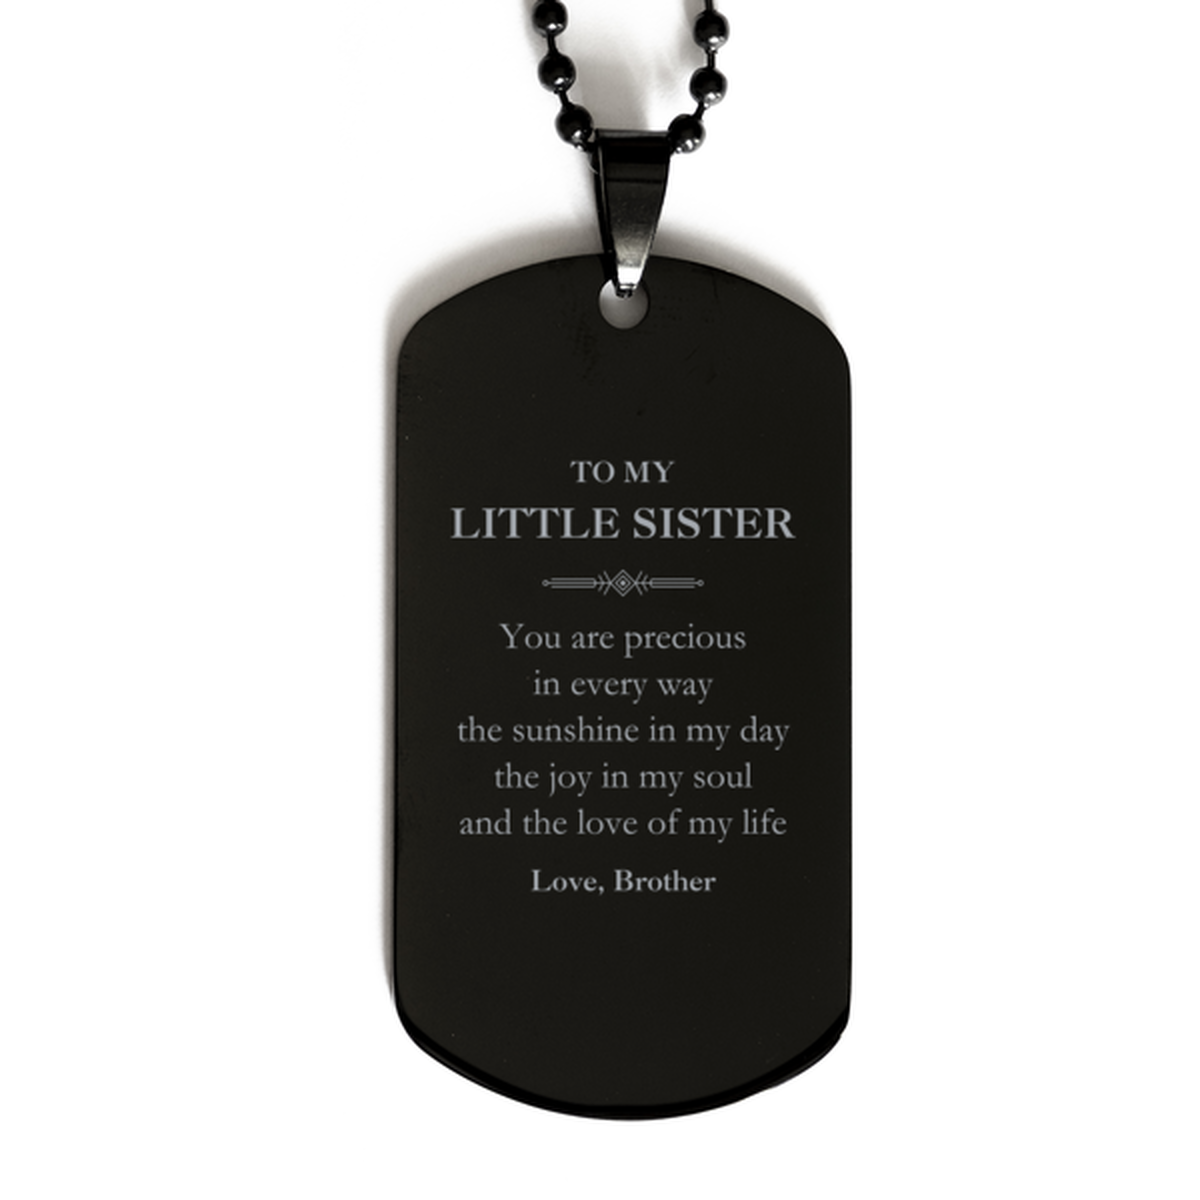 Graduation Gifts for Little Sister Black Dog Tag Present from Brother, Christmas Little Sister Birthday Gifts Little Sister You are precious in every way the sunshine in my day. Love, Brother